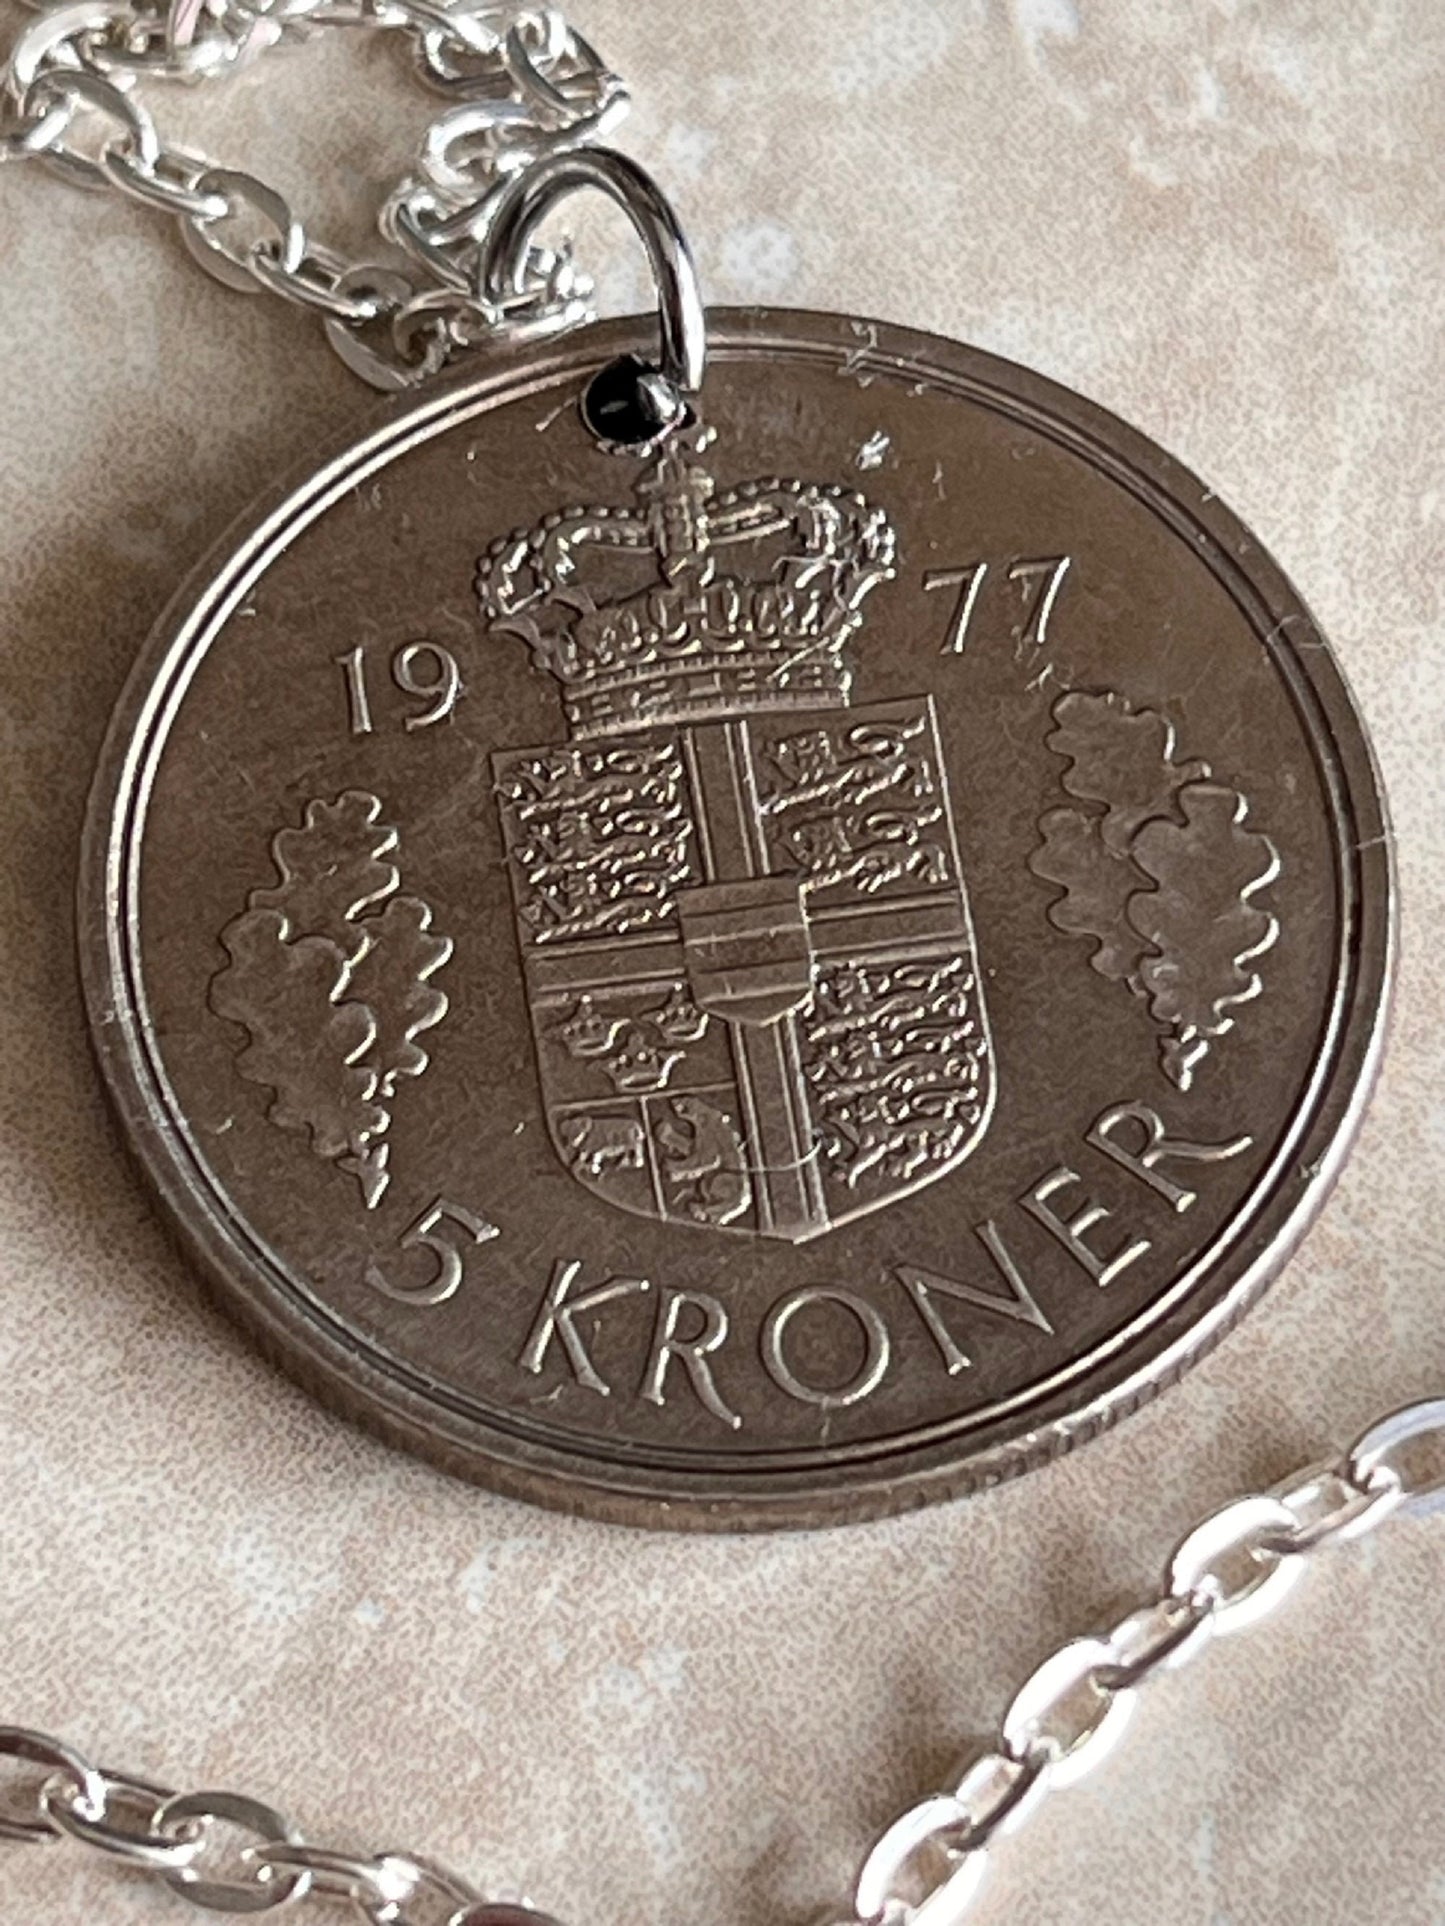 Denmark Coin Pendant 5 Kroners Danish Personal Necklace Old Vintage Handmade Jewelry Gift Friend Charm For Him Her World Coin Collector